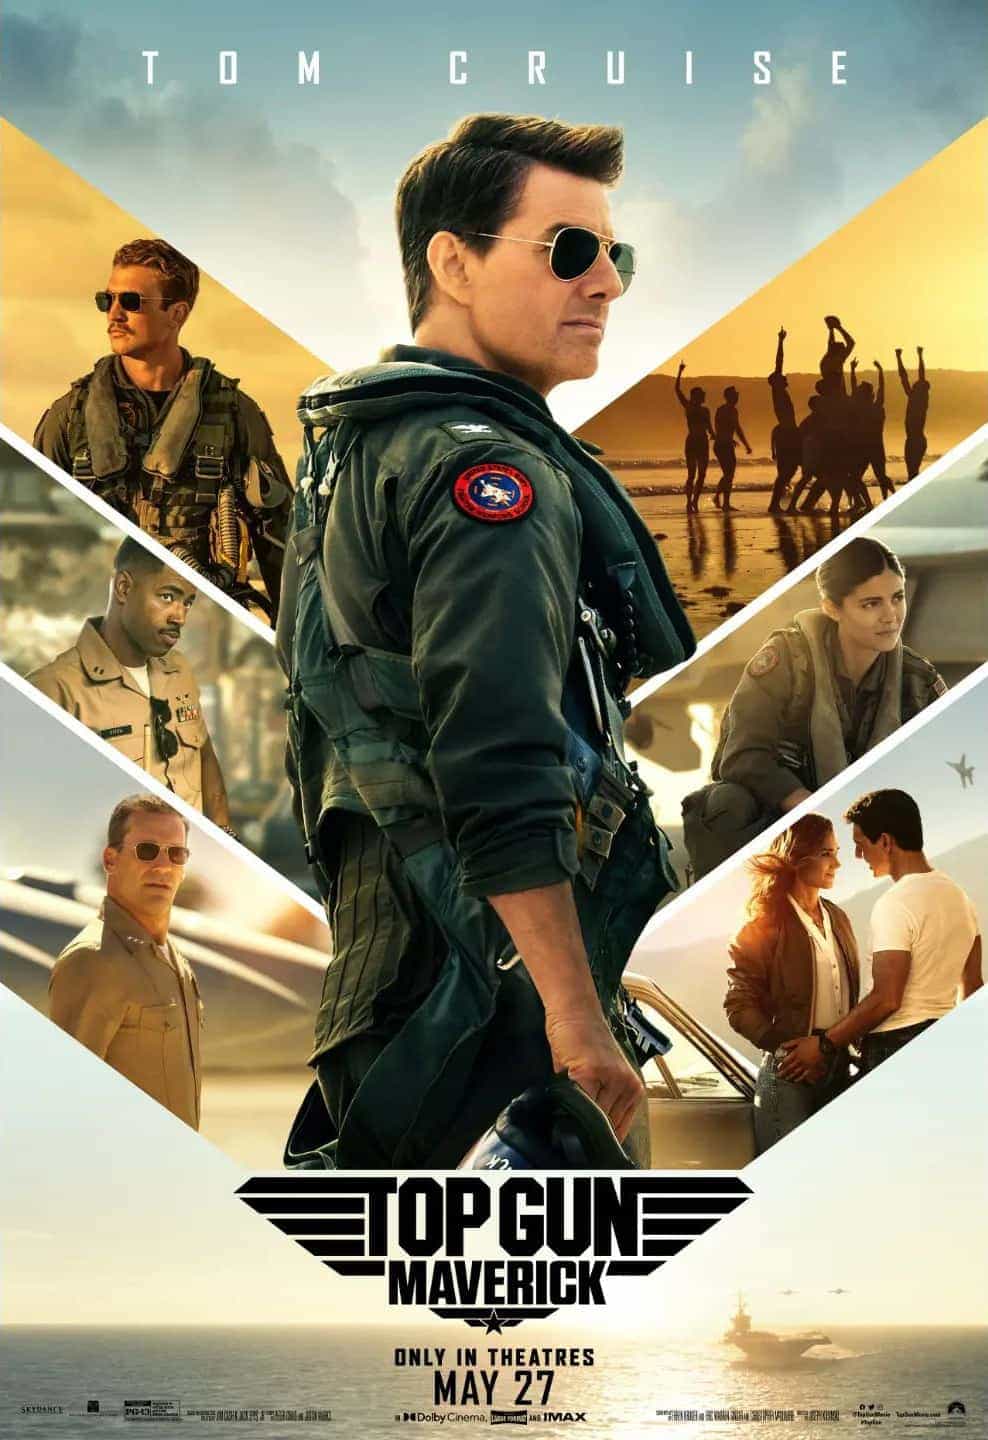 Top Gun: Maverick Super Bowl trailer - more flying and some new footage